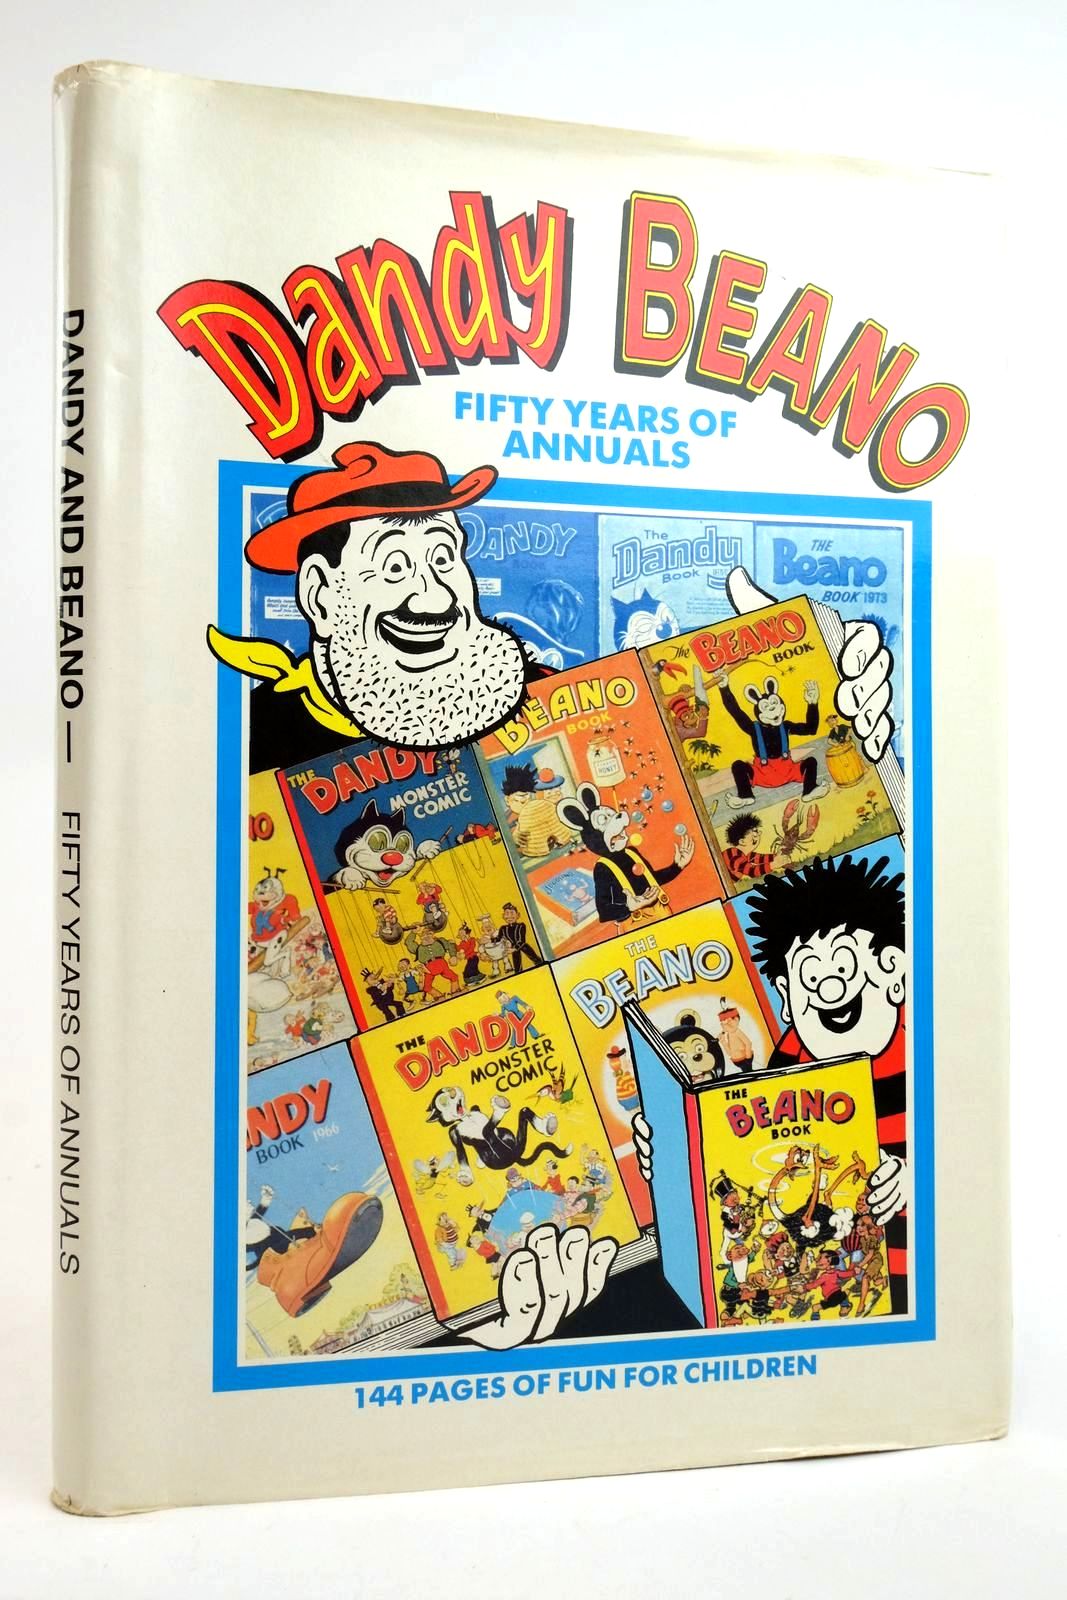 Photo of DANDY AND BEANO - FIFTY YEARS OF ANNUALS published by D.C. Thomson & Co Ltd. (STOCK CODE: 2135840)  for sale by Stella & Rose's Books